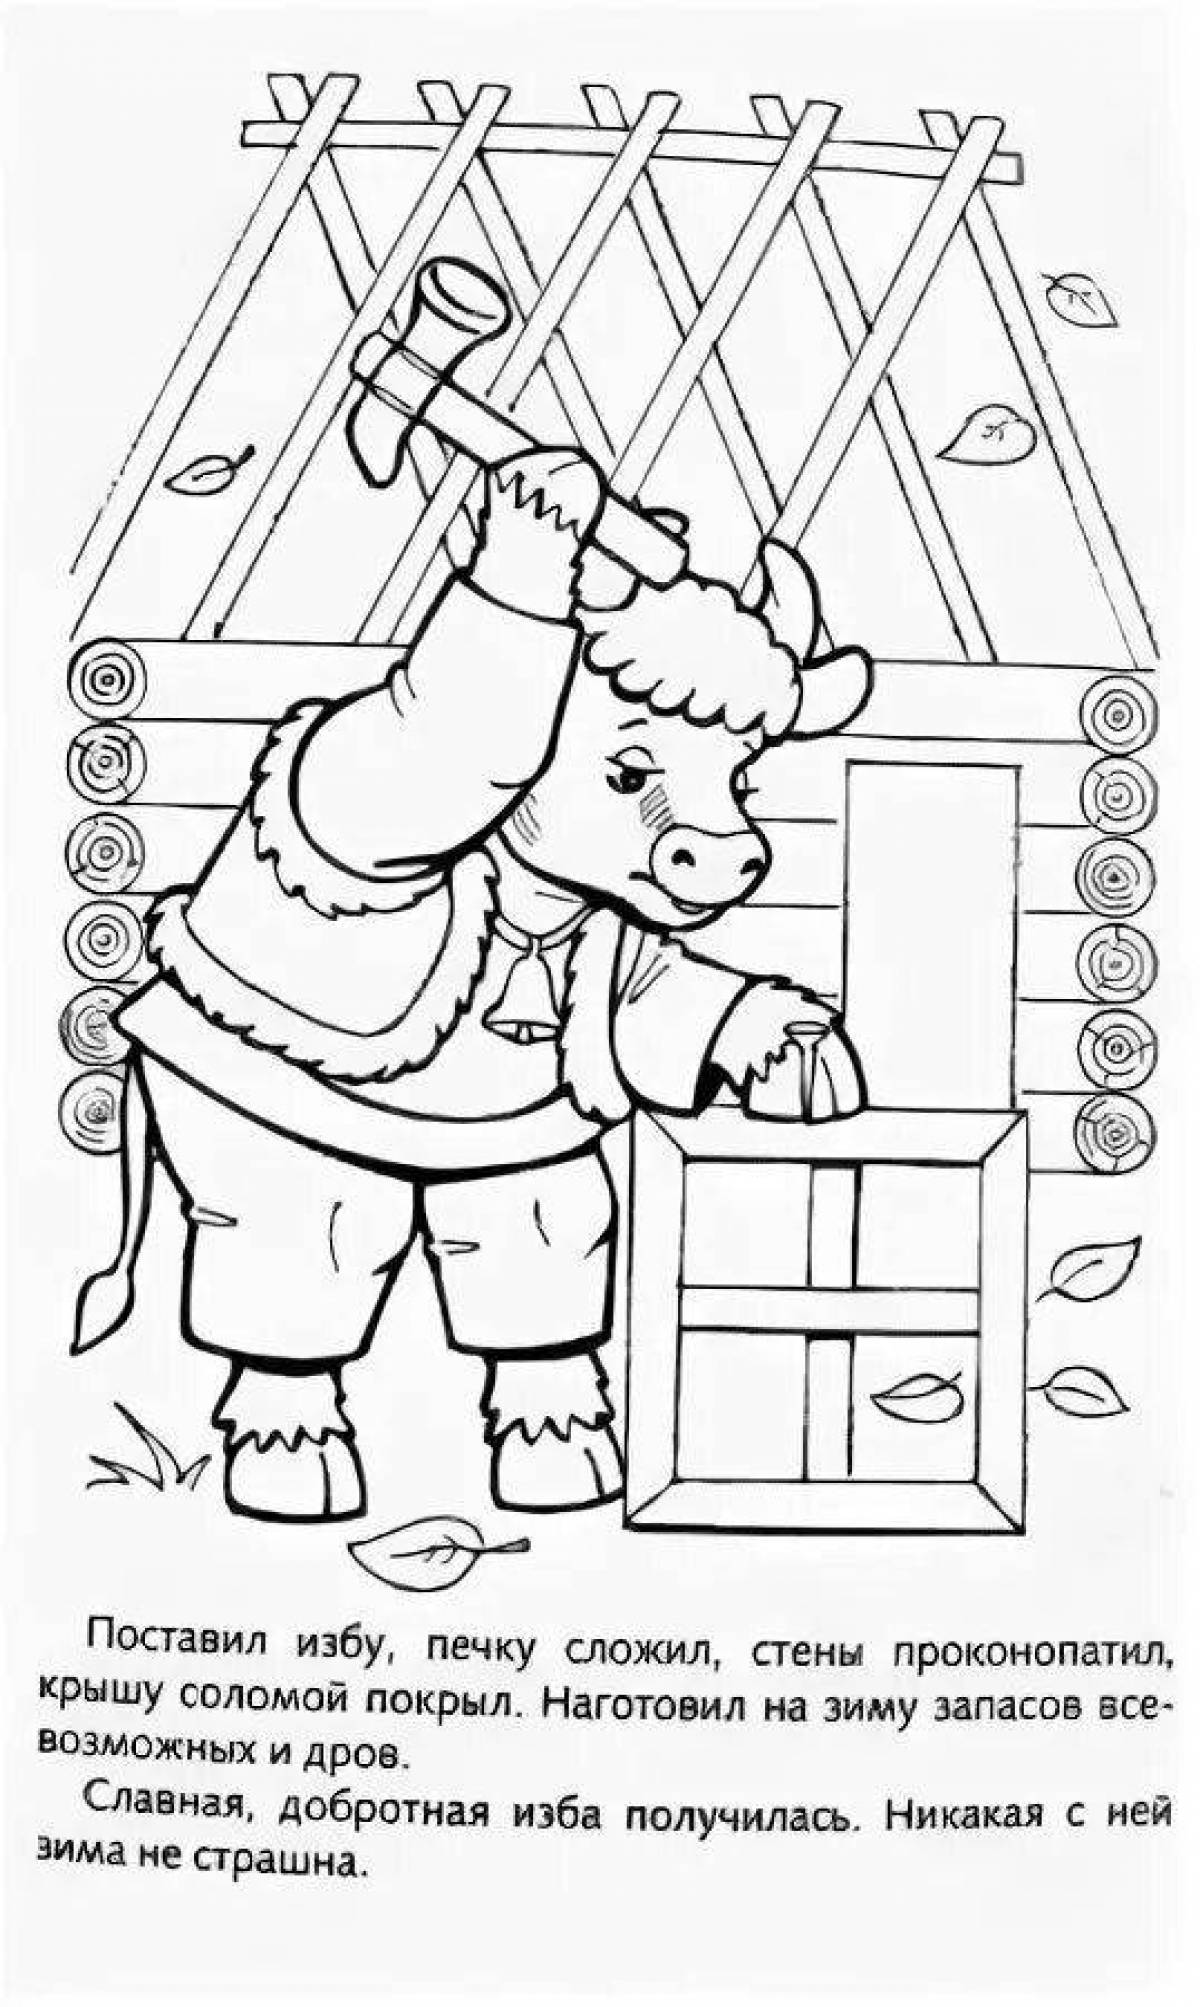 Playful winter hut coloring page for kids